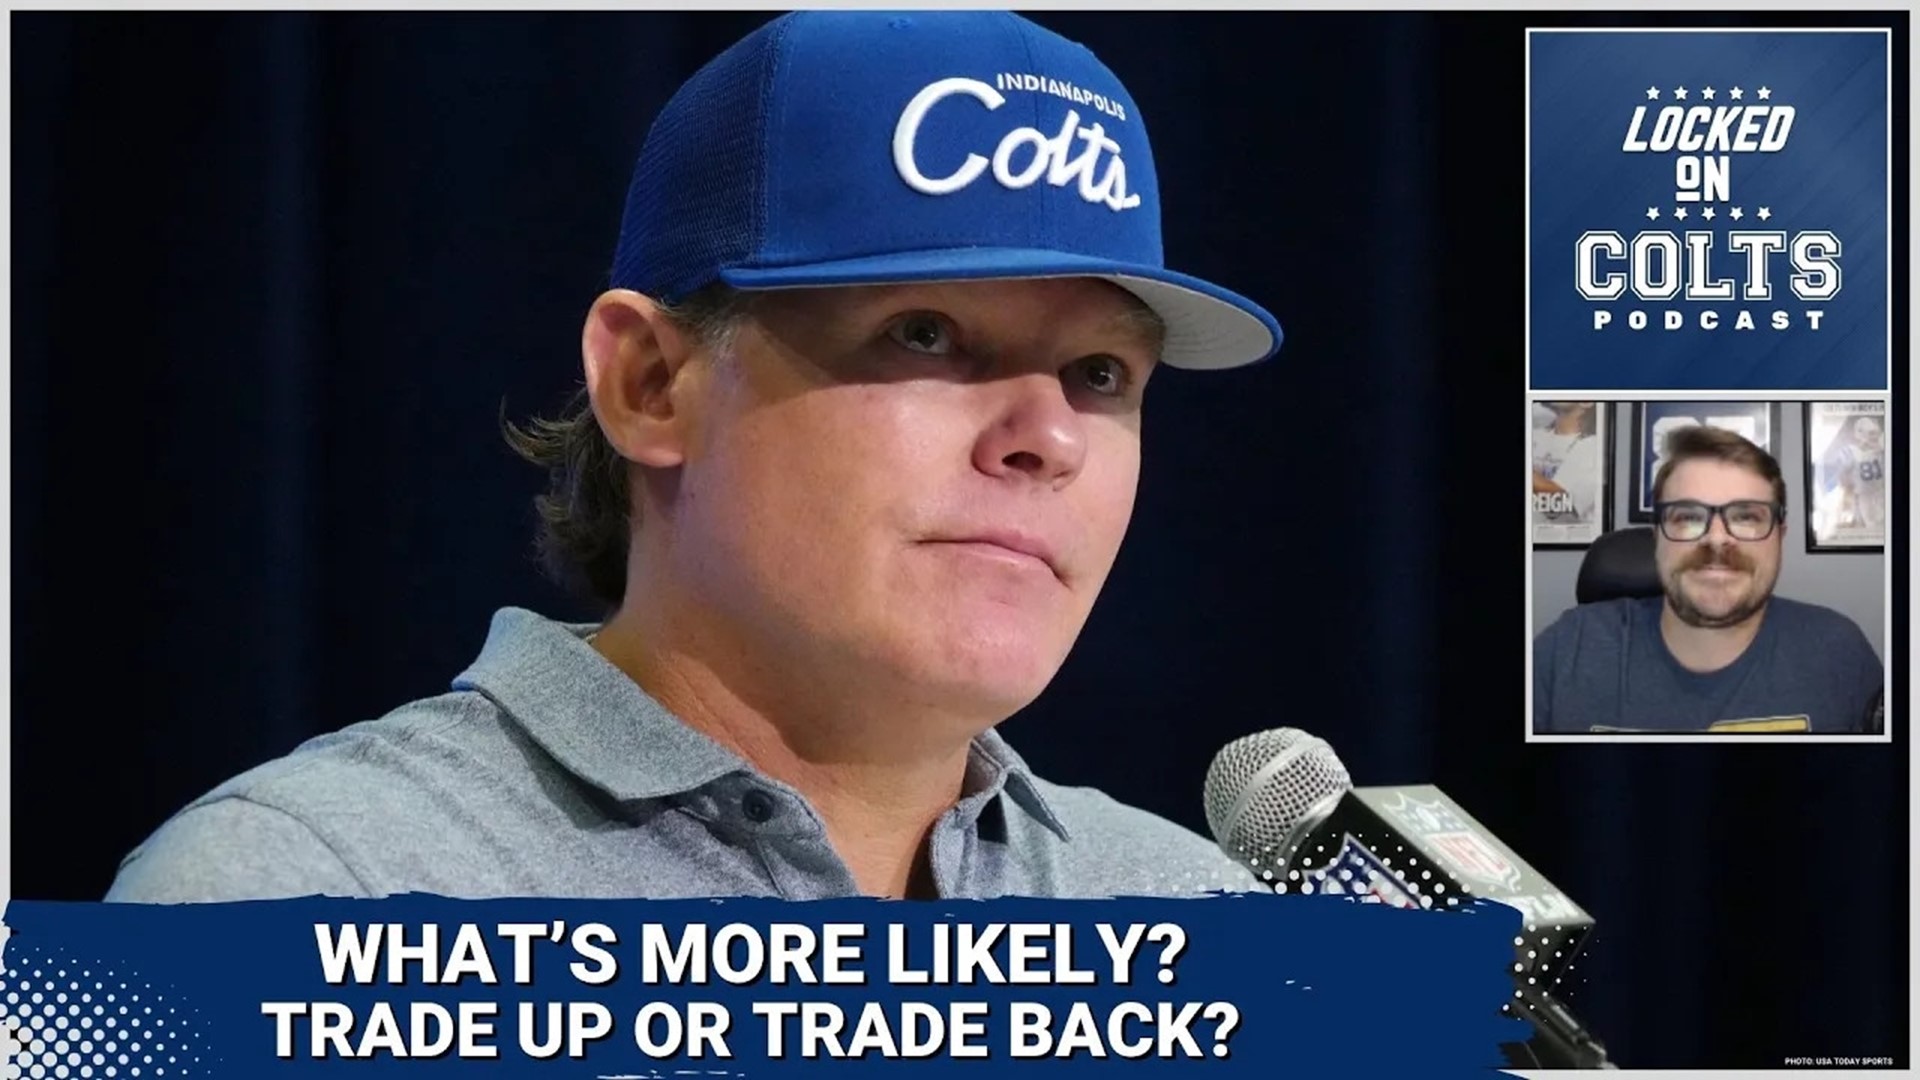 Another Indianapolis Colts Q&A brought listener questions about trading up or back in the 2024 NFL Draft.